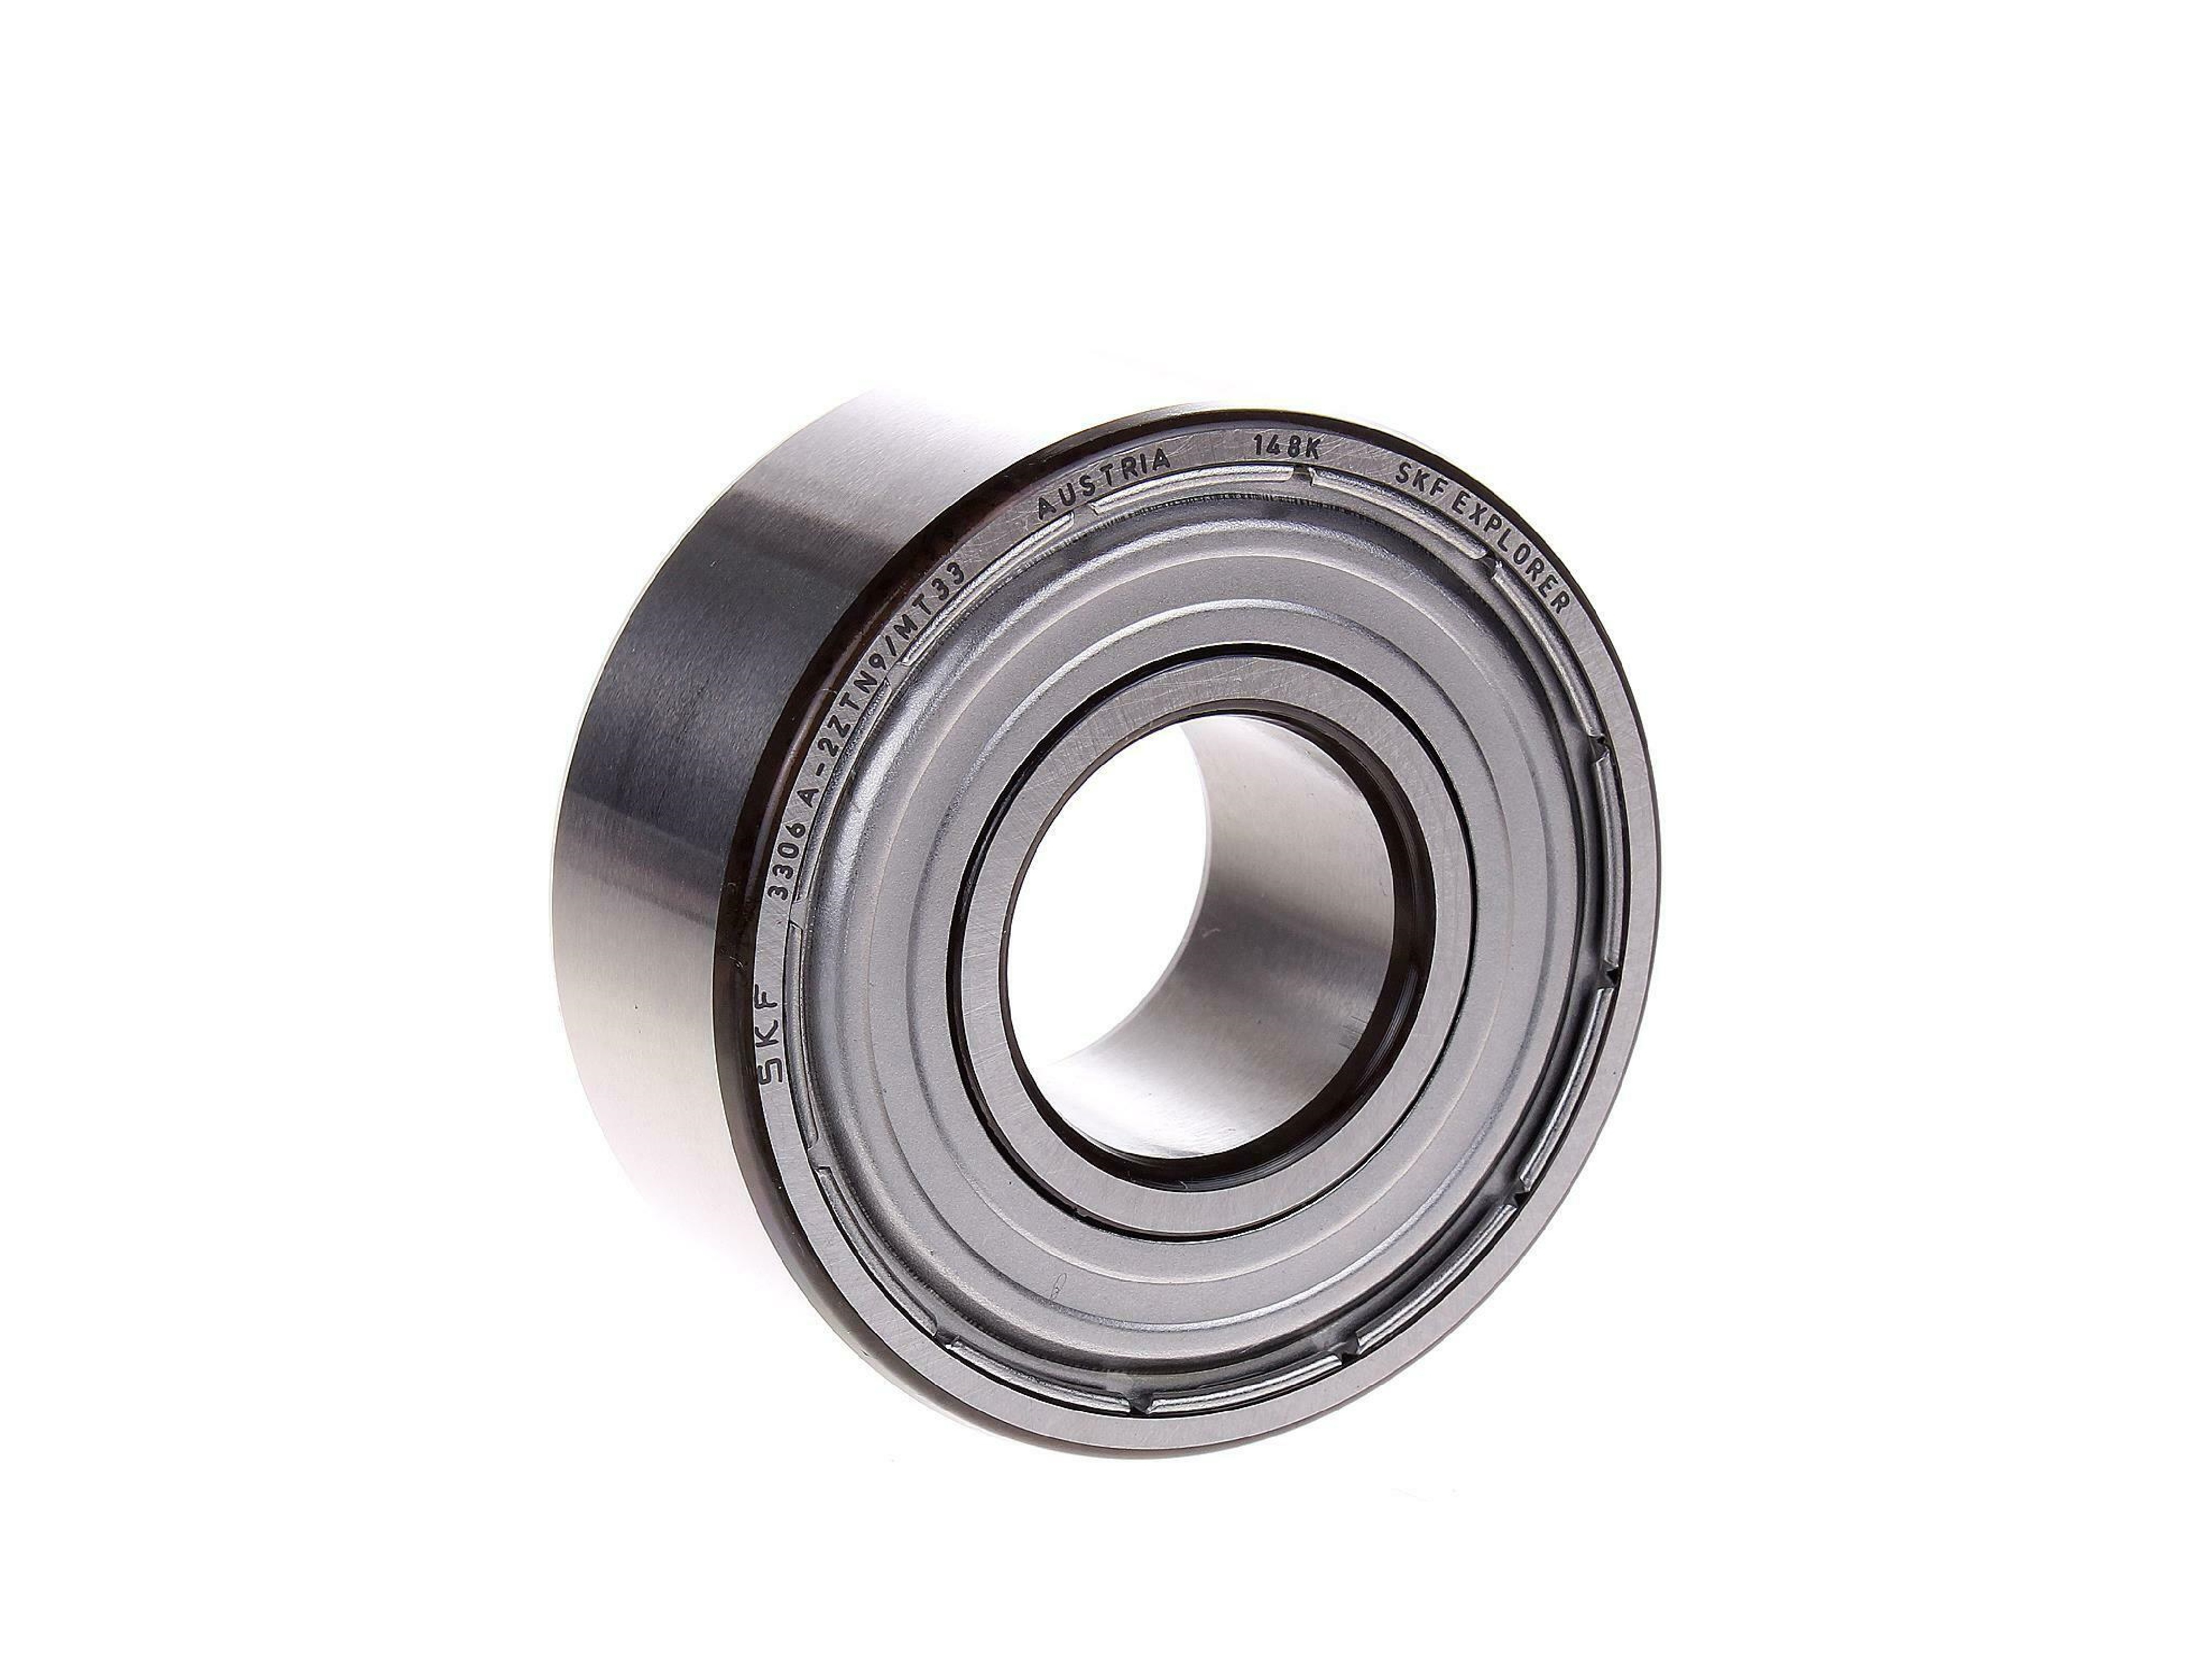 3308A-2ZTN9/MT33 SKF Double Row Angular Contact Ball Bearing - Shielded 40mm x 90mm x 36.5mm